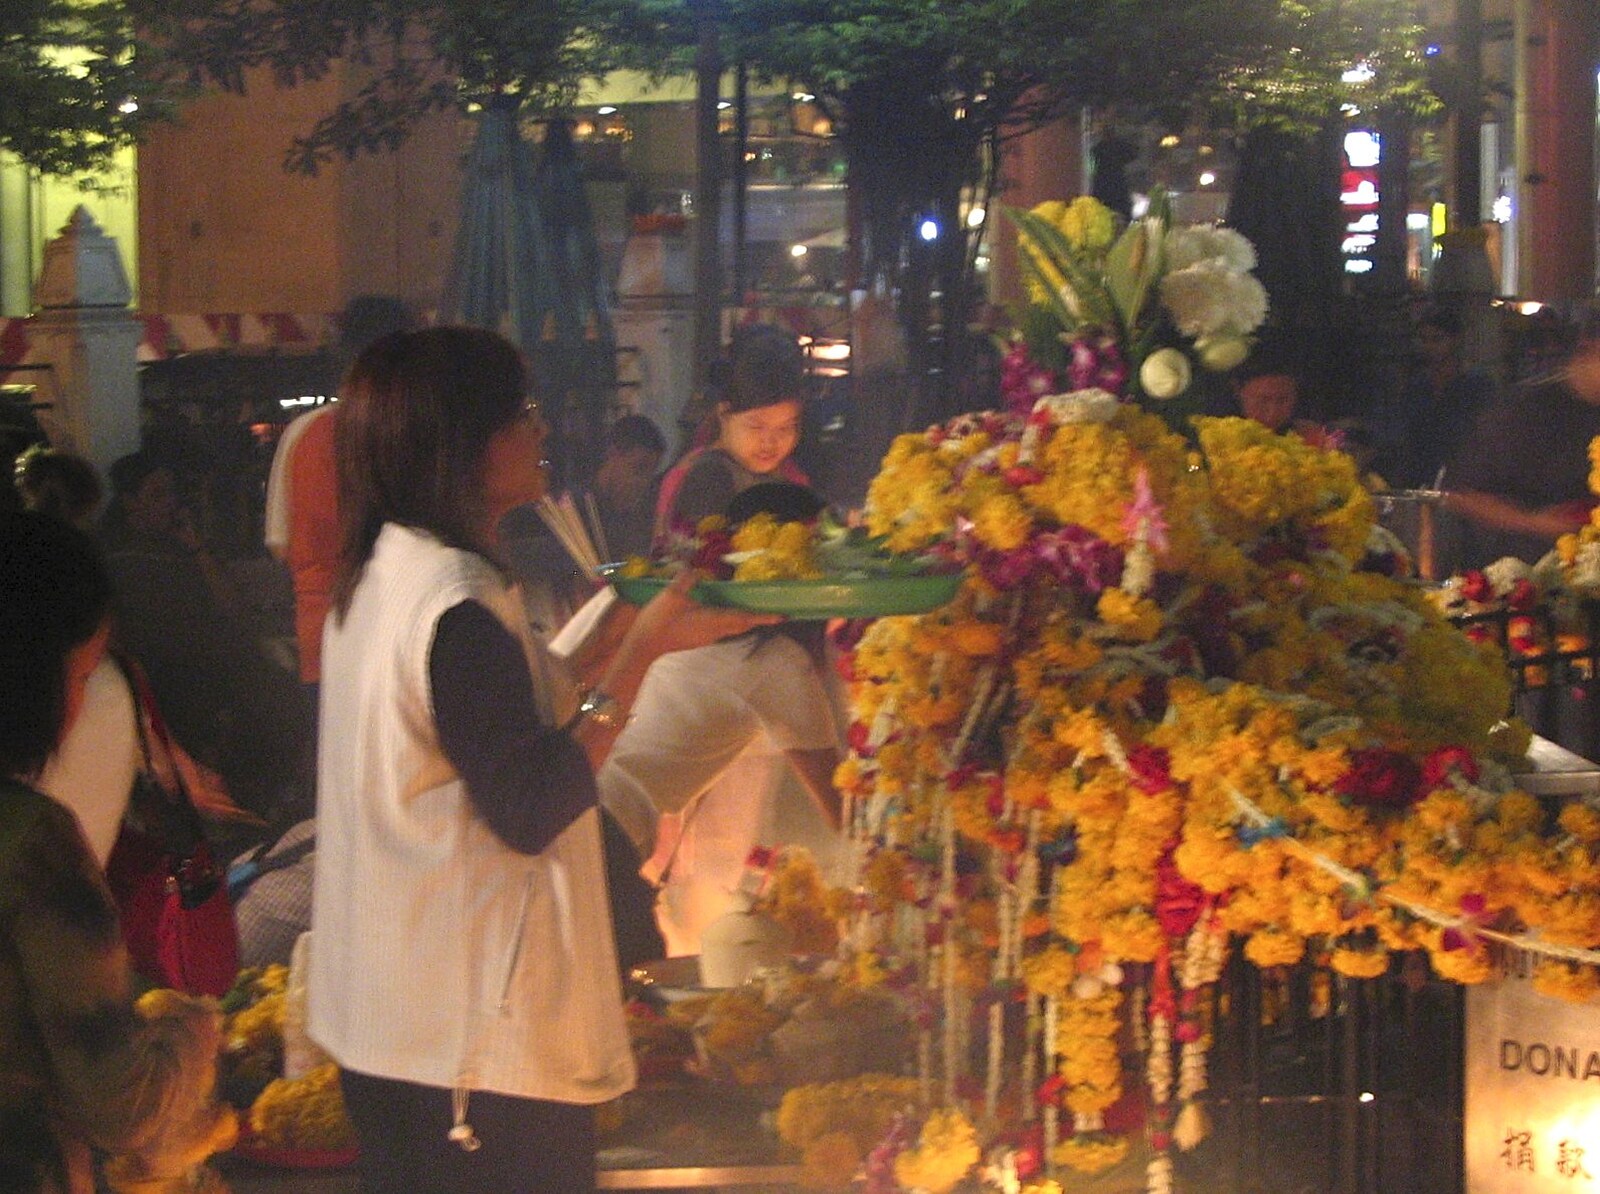 An offering of fruit and flowers to the god from A Working Trip to Bangkok, Thailand - 2nd October 2004